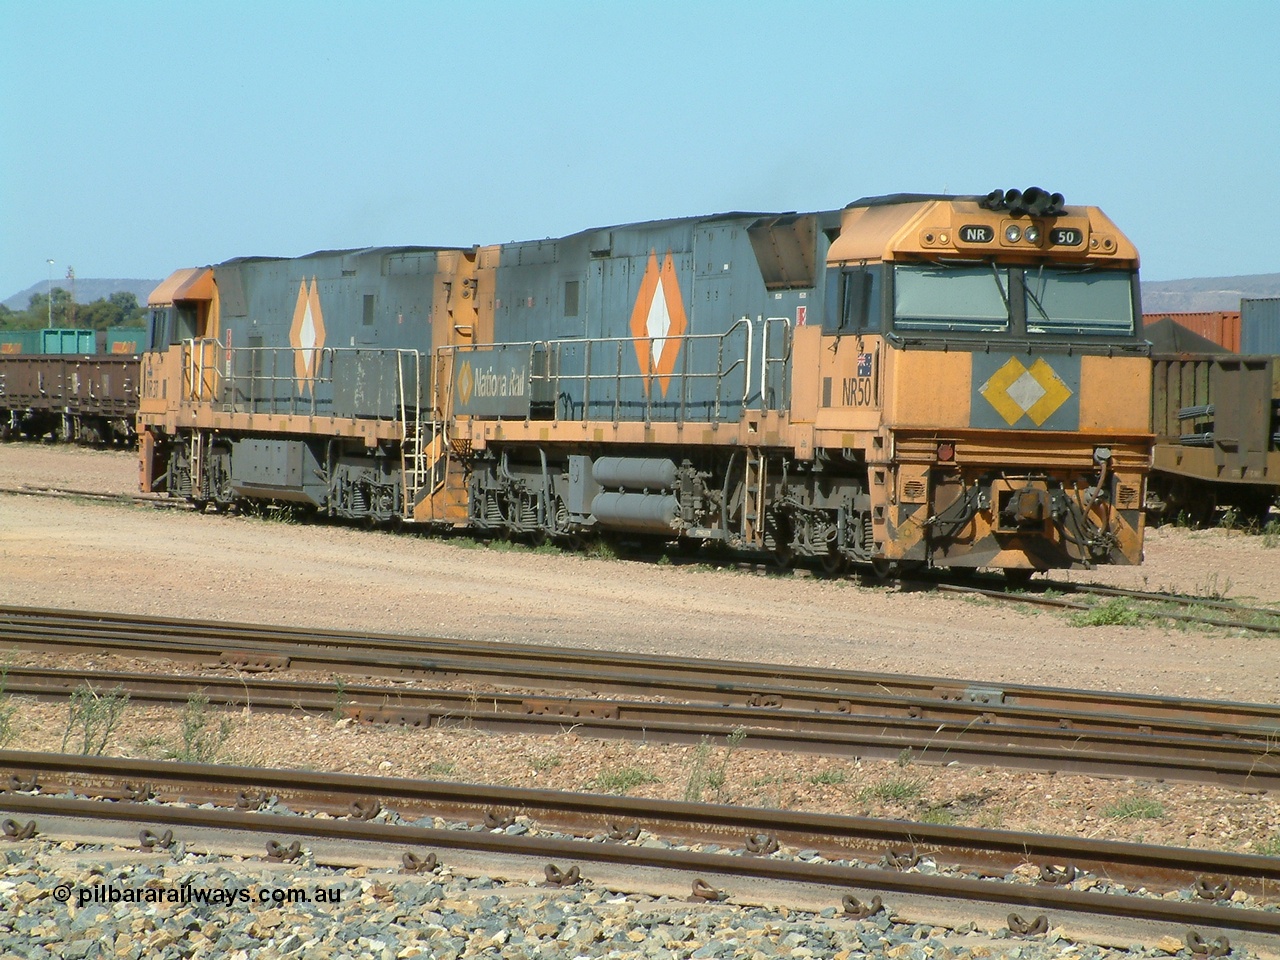 030404 103651
Port Augusta Spencer Junction yard, National Rail Goninan built GE Cv40-9i model NR class unit NR 50 serial 7250-08 / 97-252 lay about the yard in between jobs. 4th April 2003.
Keywords: NR-class;NR50;Goninan;GE;Cv40-9i;7250-08/97-252;